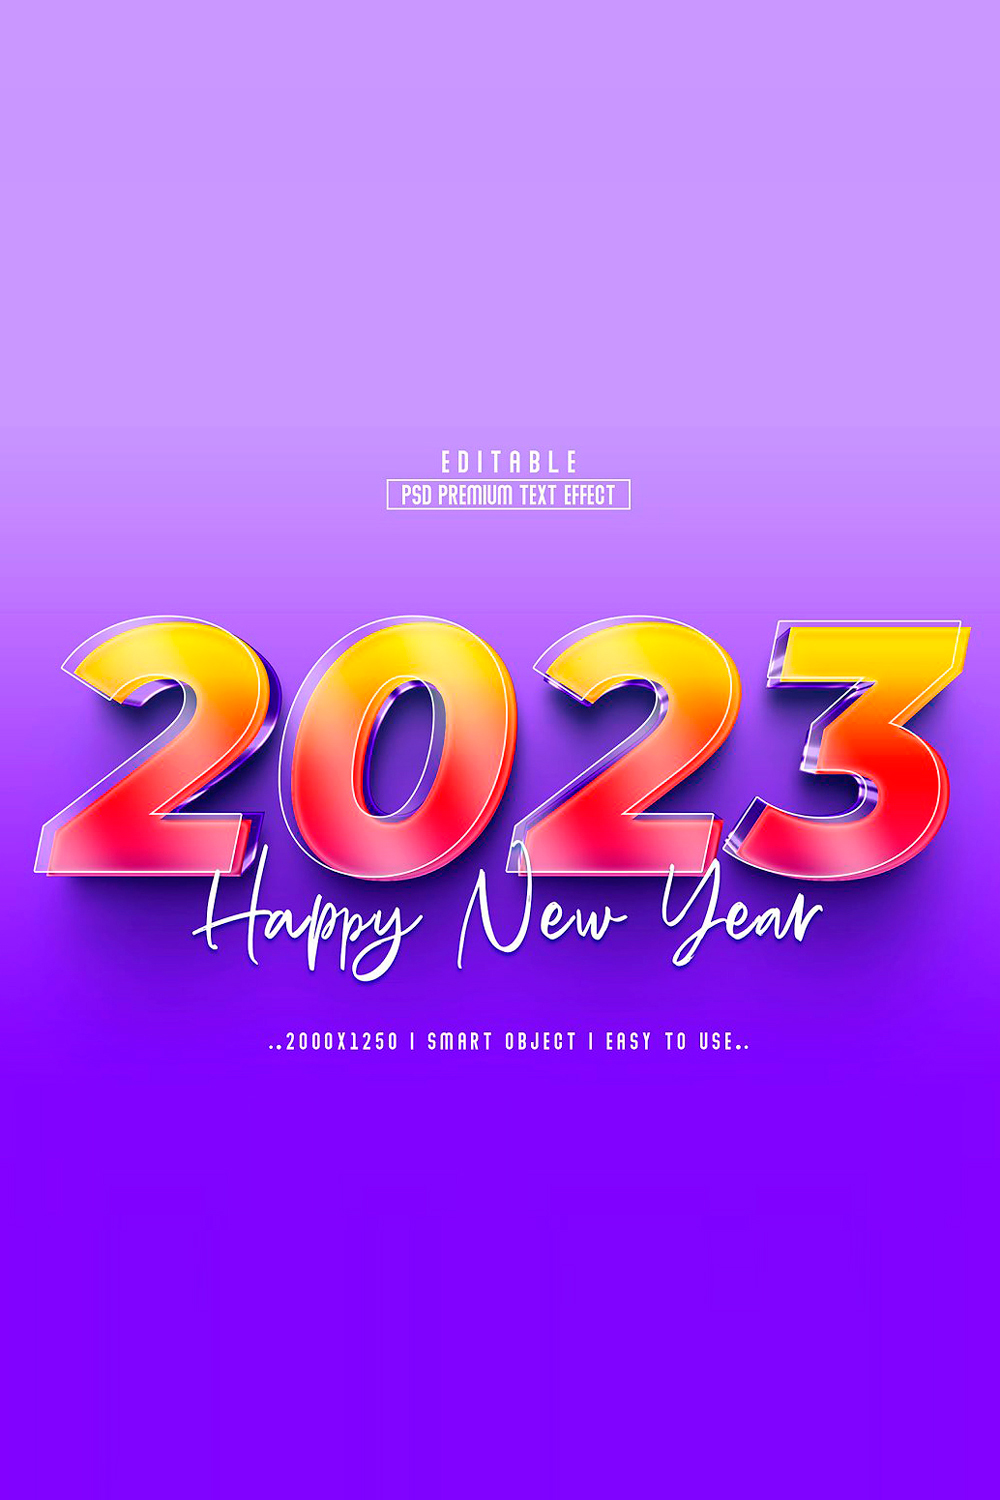 Happy new year greeting card with a purple background.